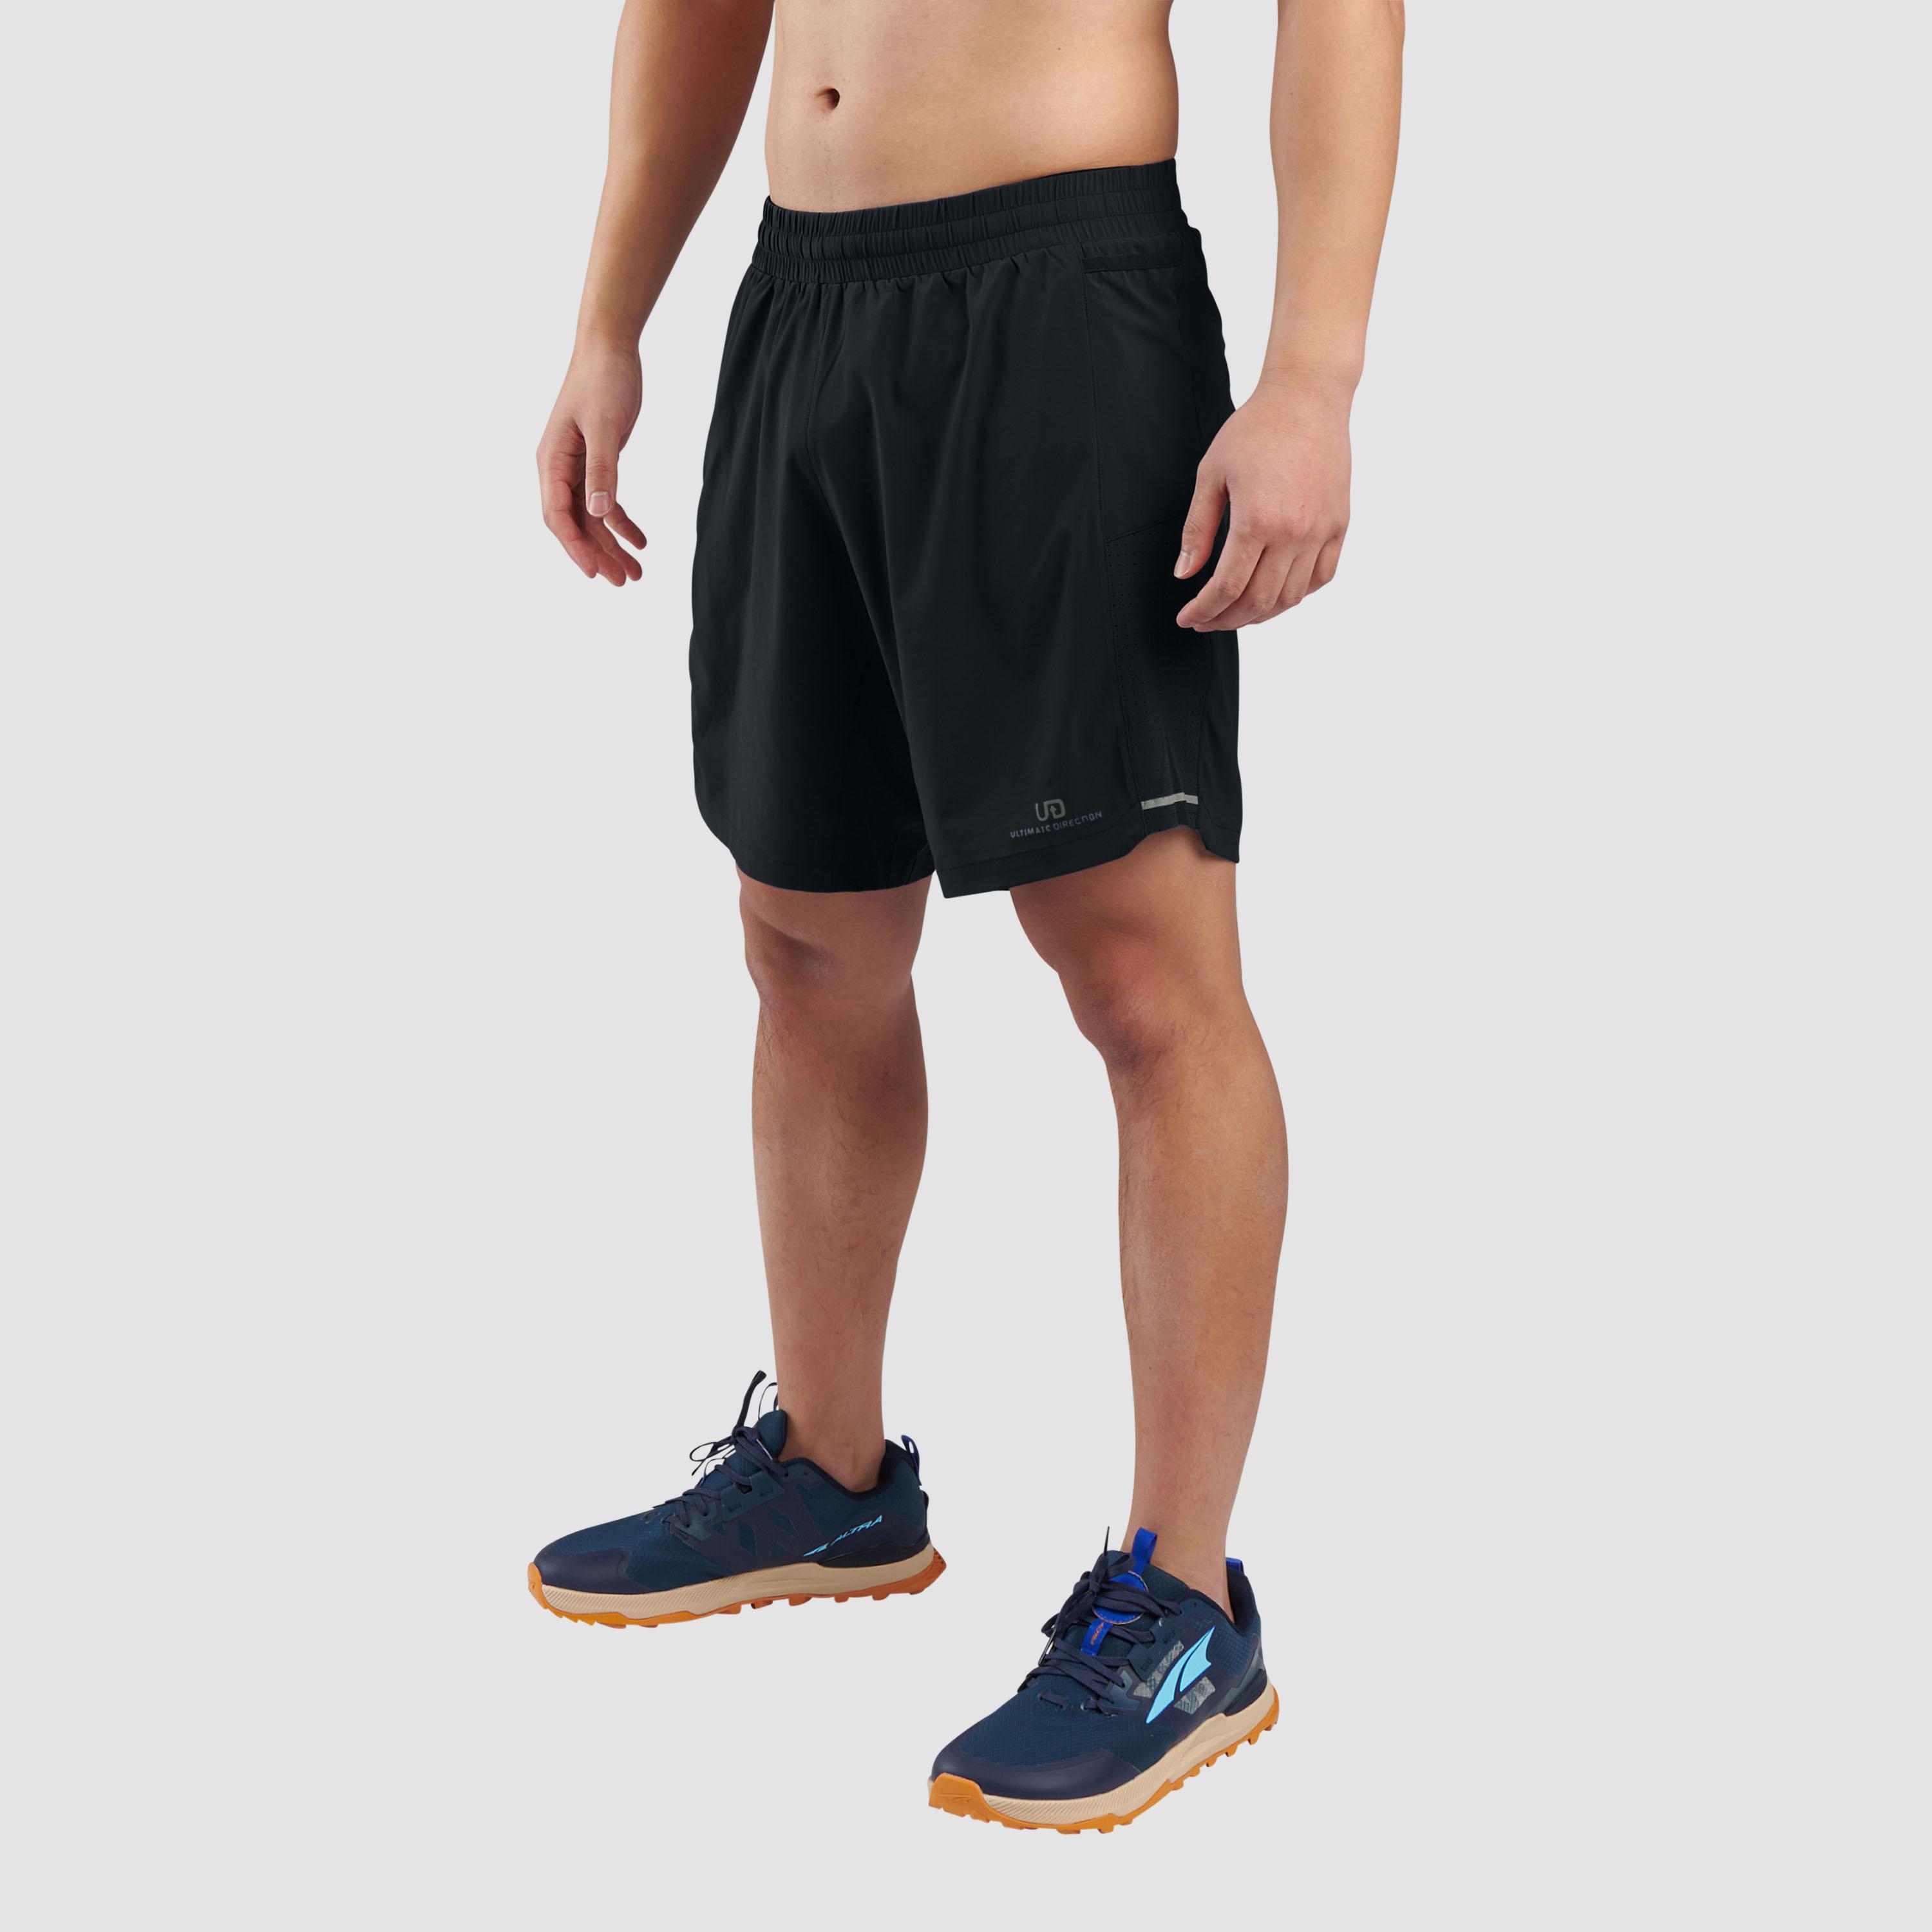 Ultimate Direction Stratus Short - Onyx